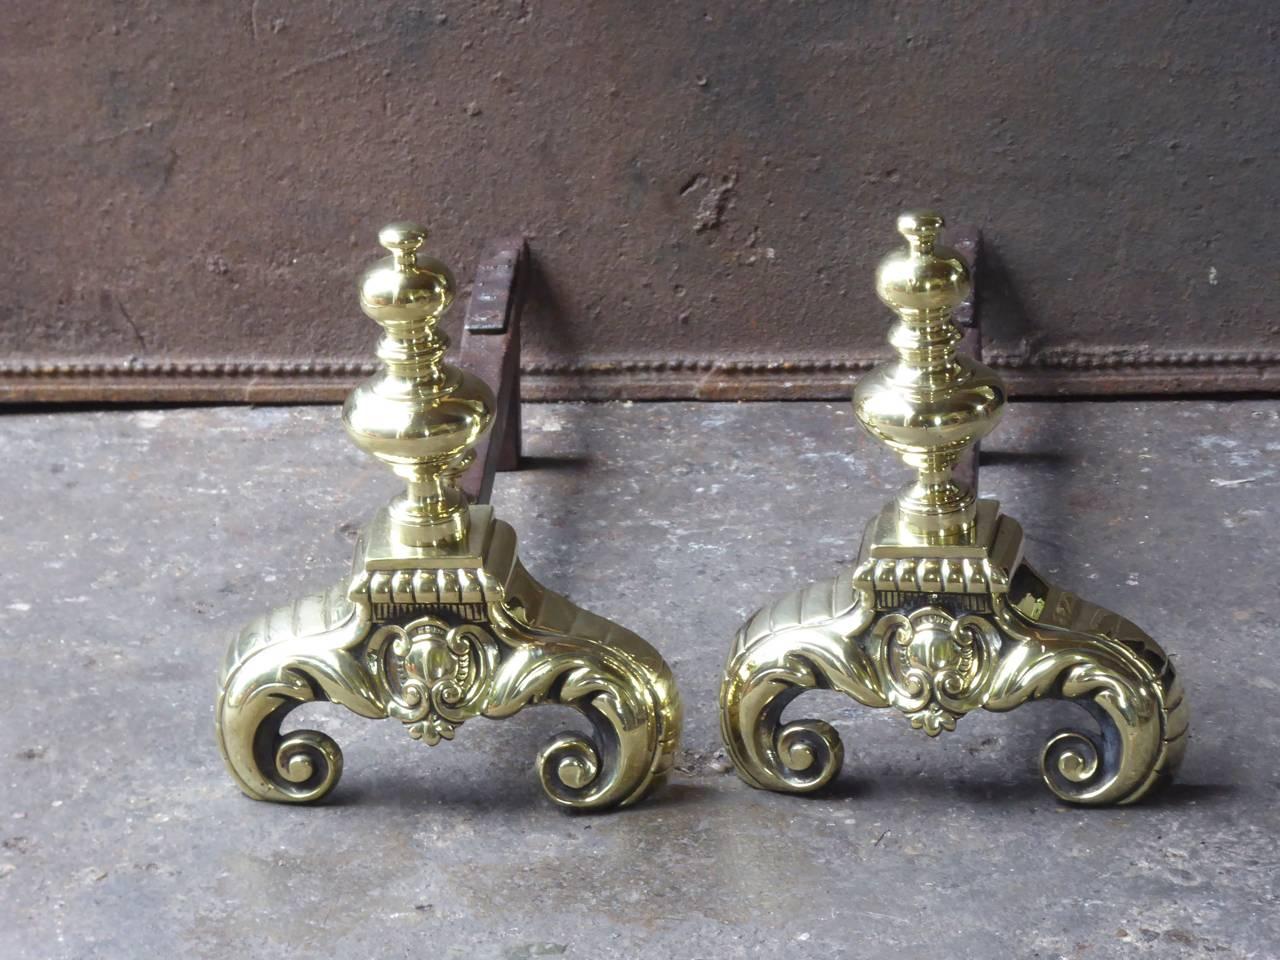 18th century Louis XV andirons made of polished brass and wrought iron.

We have a unique and specialized collection of antique and used fireplace accessories consisting of more than 1000 listings at 1stdibs. Amongst others, we always have 300+